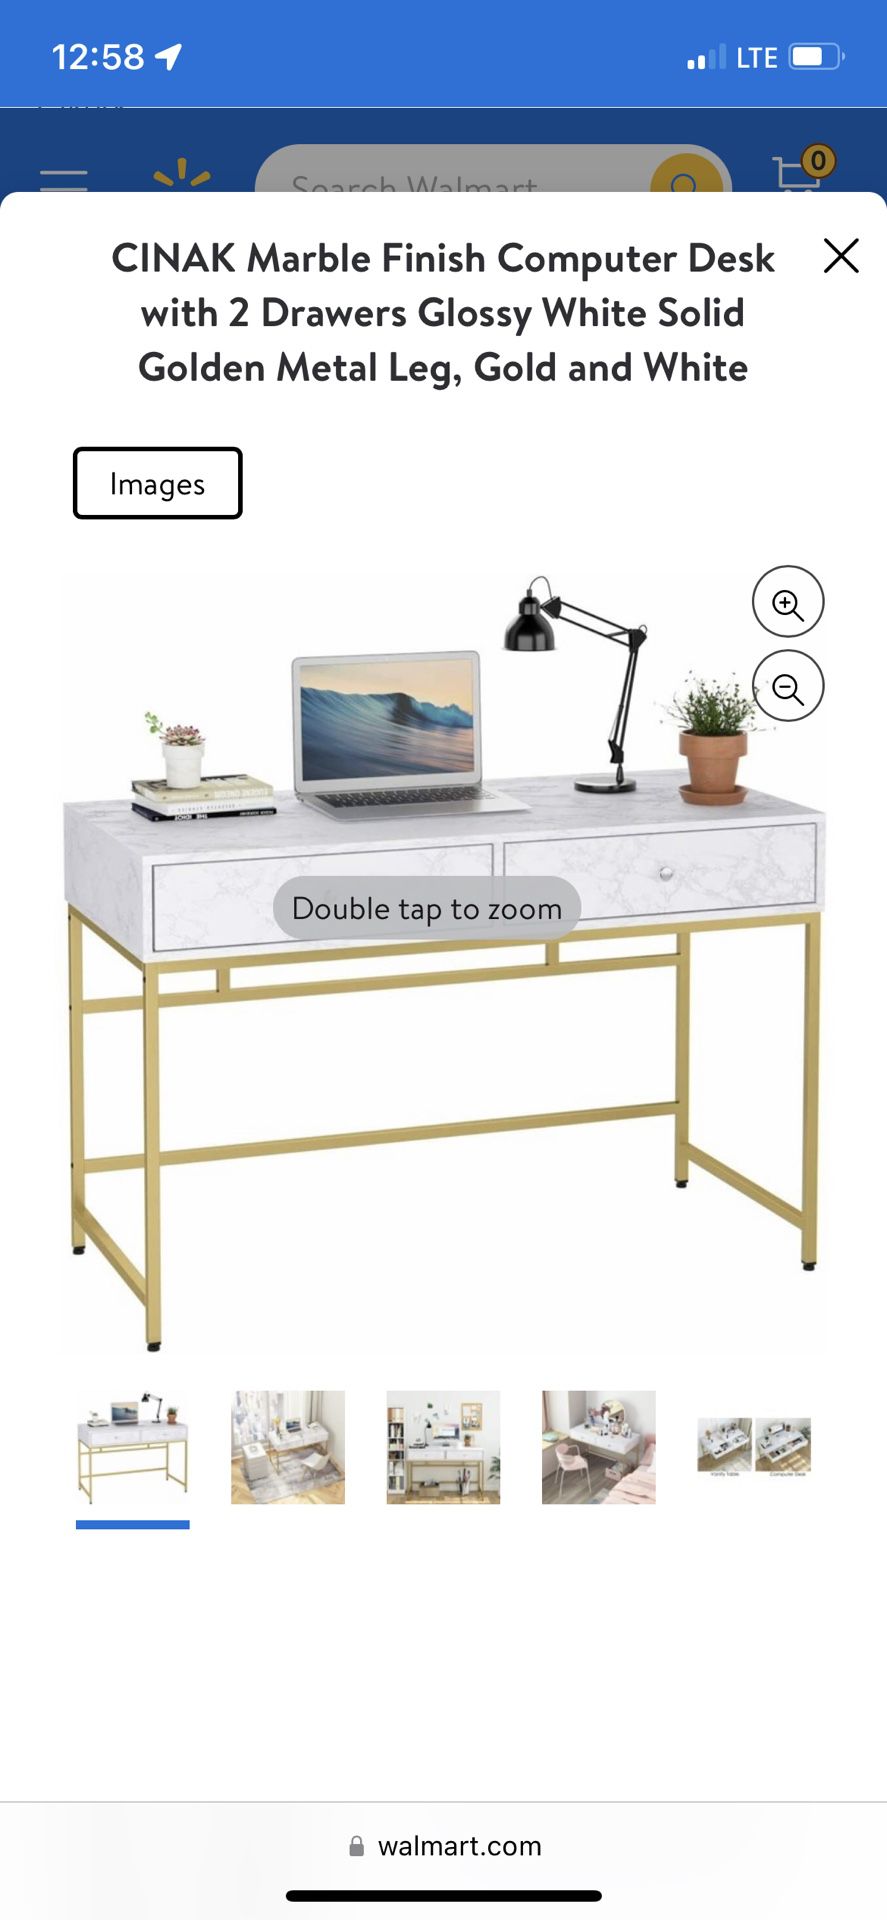 CINAK Marble Finish Computer Desk with 2 Drawers Glossy White Solid Golden Metal Leg, Gold and White